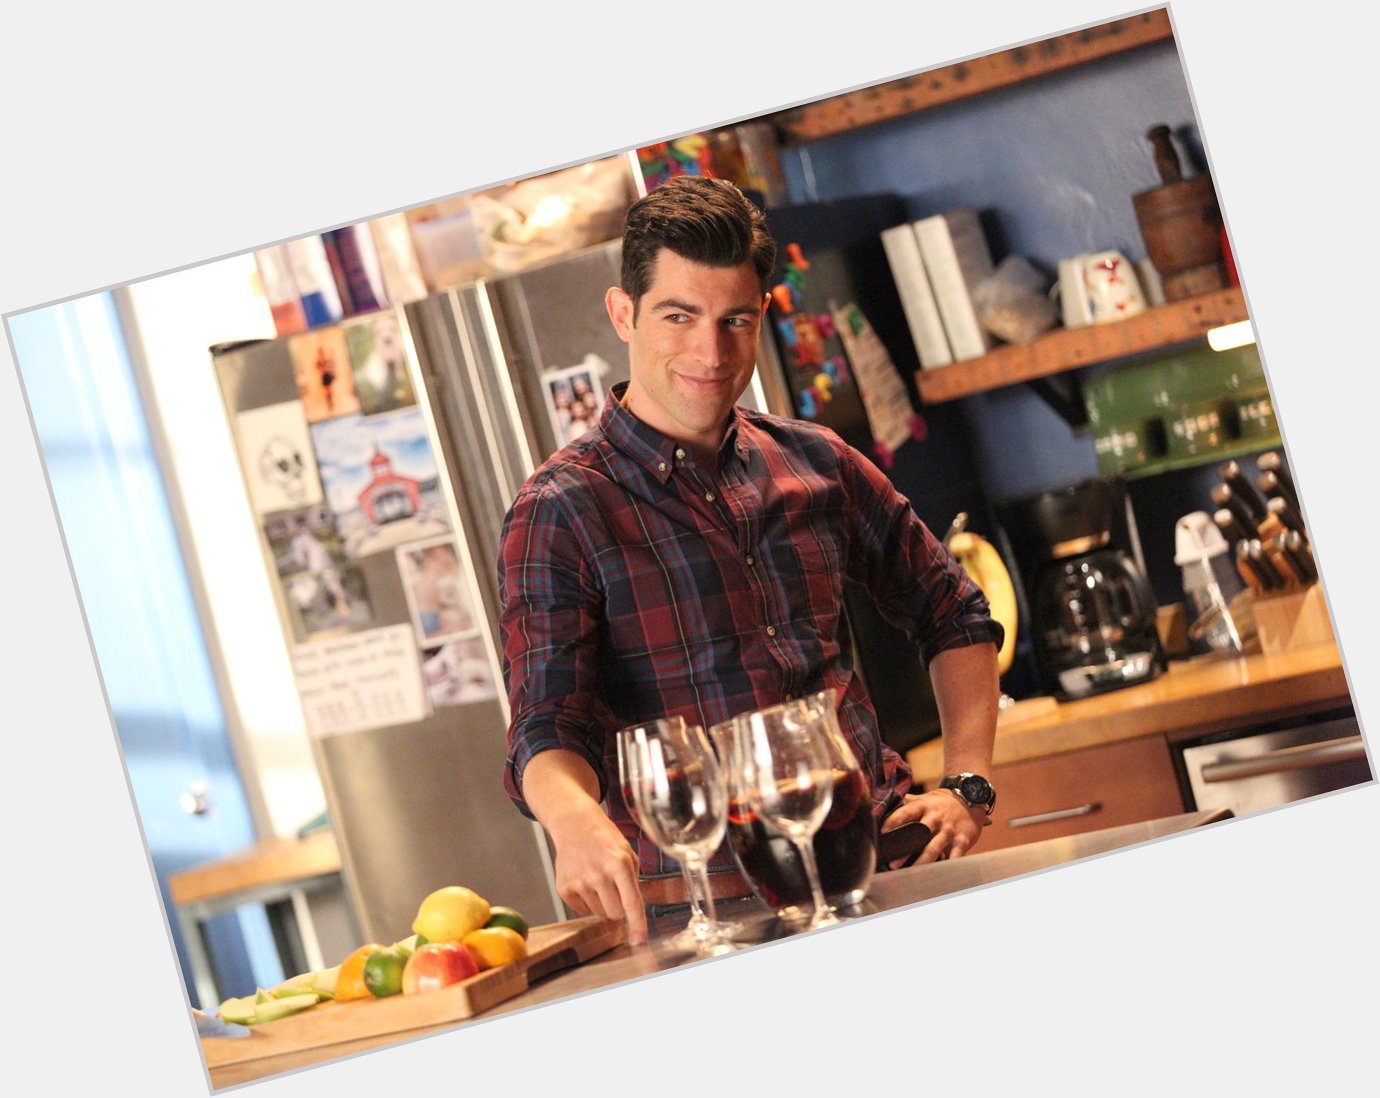 Wishing a happy 40th birthday to actor Max Greenfield. 